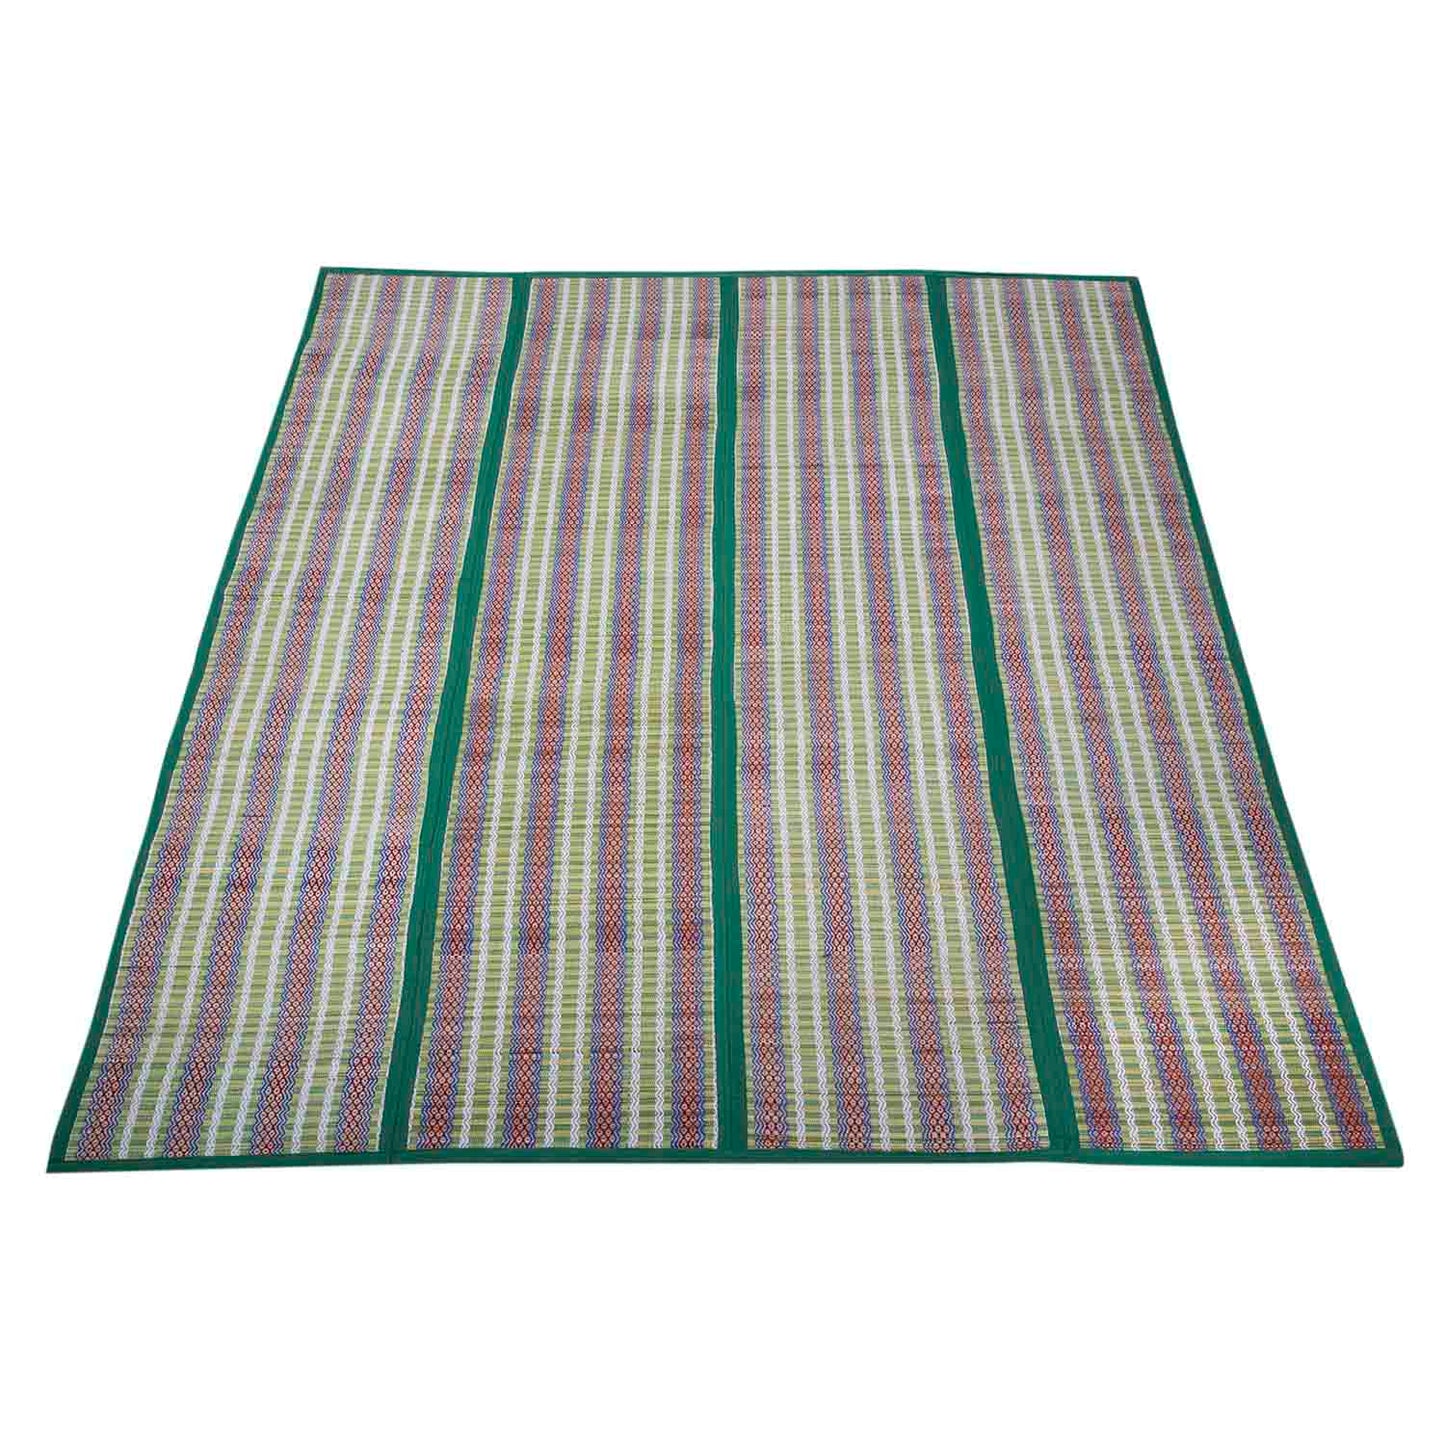 Madurkathi Chatai Mat Foldable Handwoven Eco-friendly perfect for sleeping, sitting, Yoga - T3-39